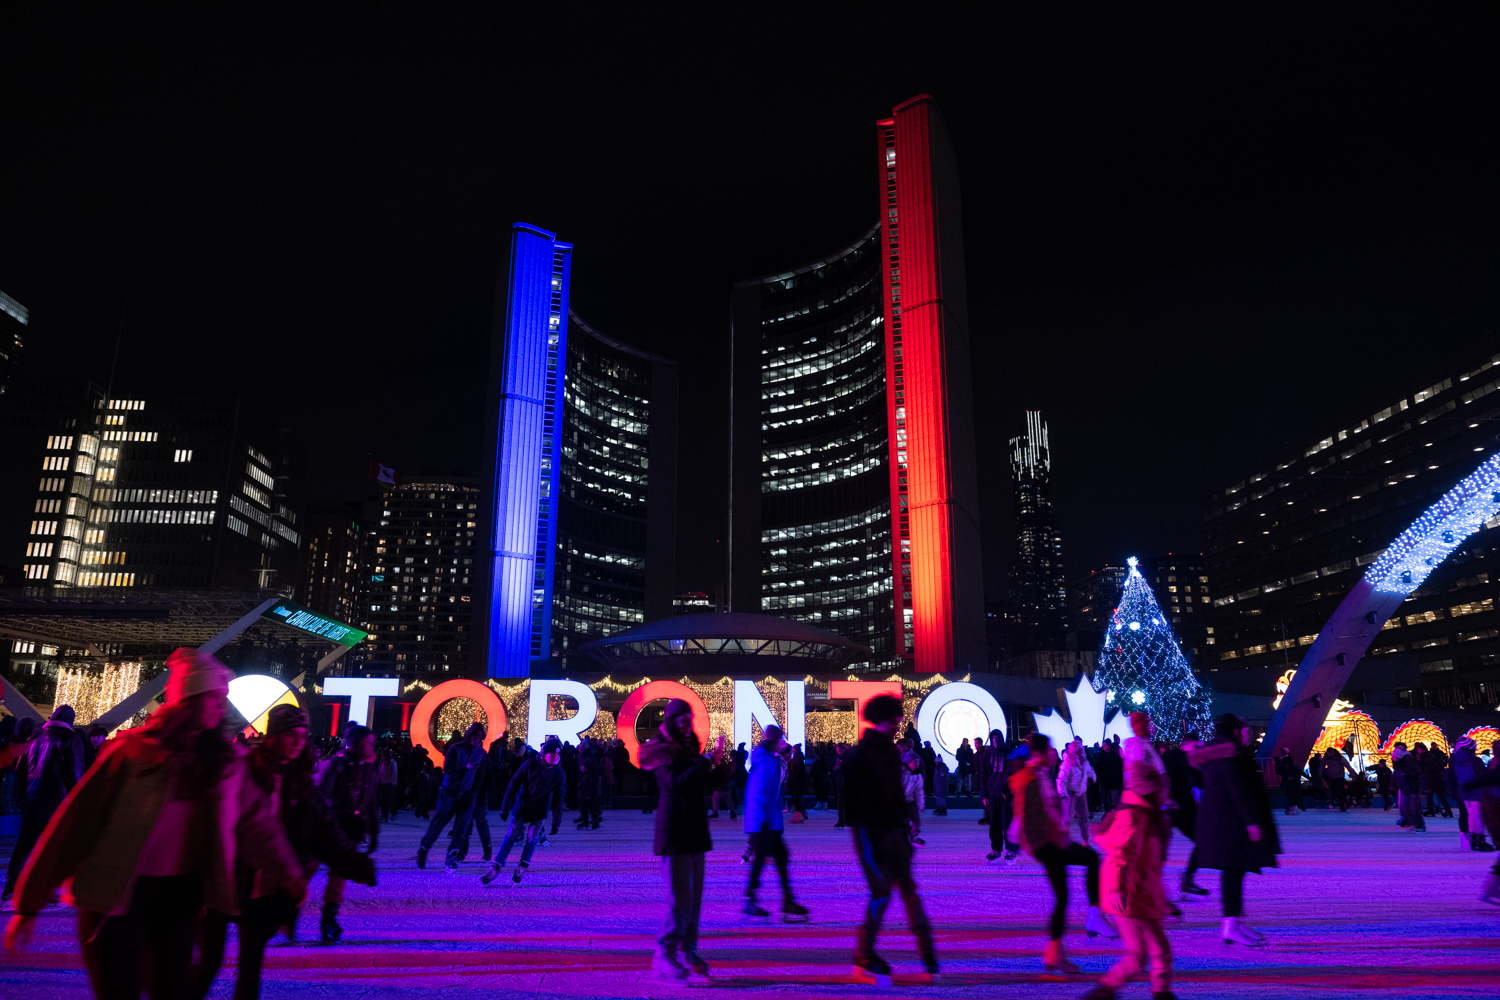 People skating outside in Nathan Phillips Square with Toronto sign lit up, a giant Christmas tree and City Hall lit red and blue in the background.